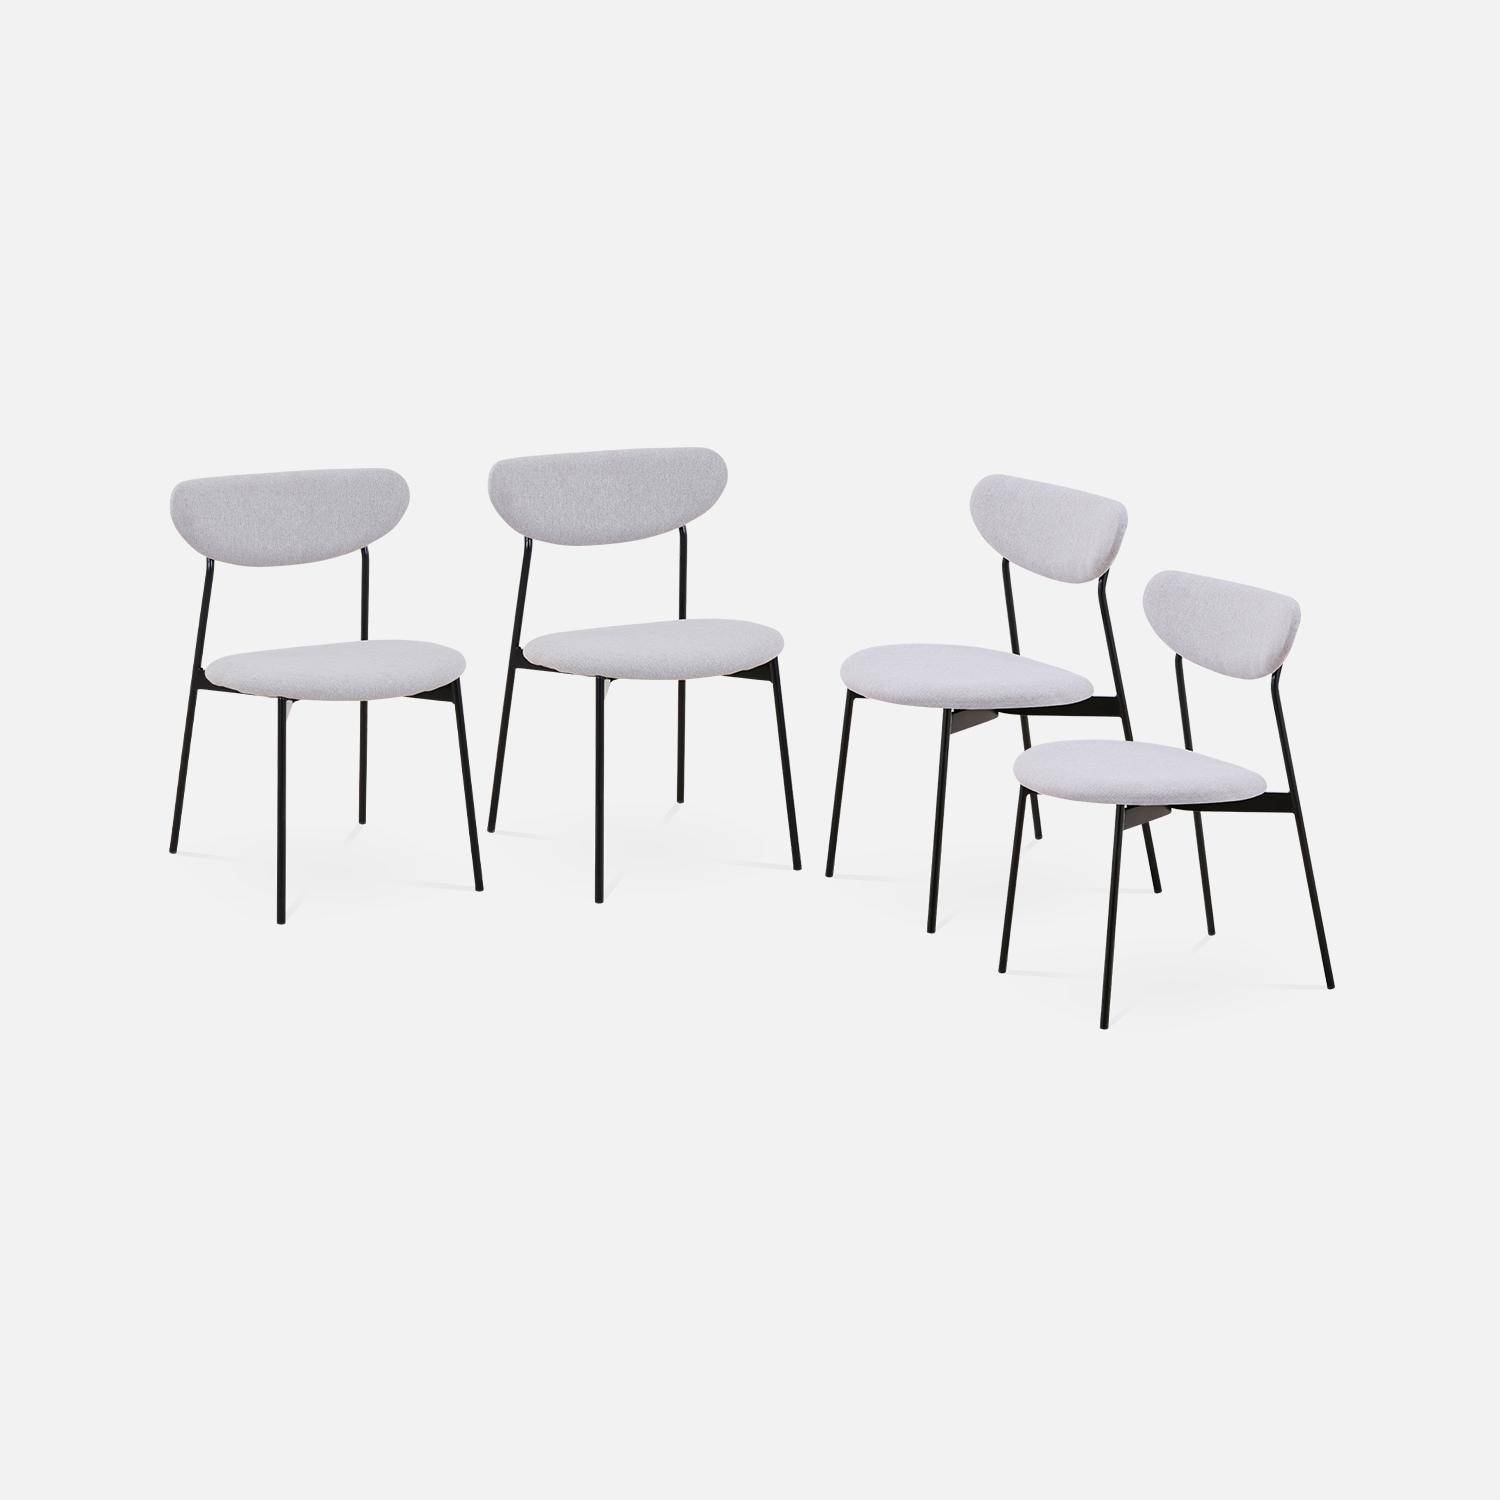 Set of 4 retro style dining chairs with steel legs - Arty - Light Grey Photo2